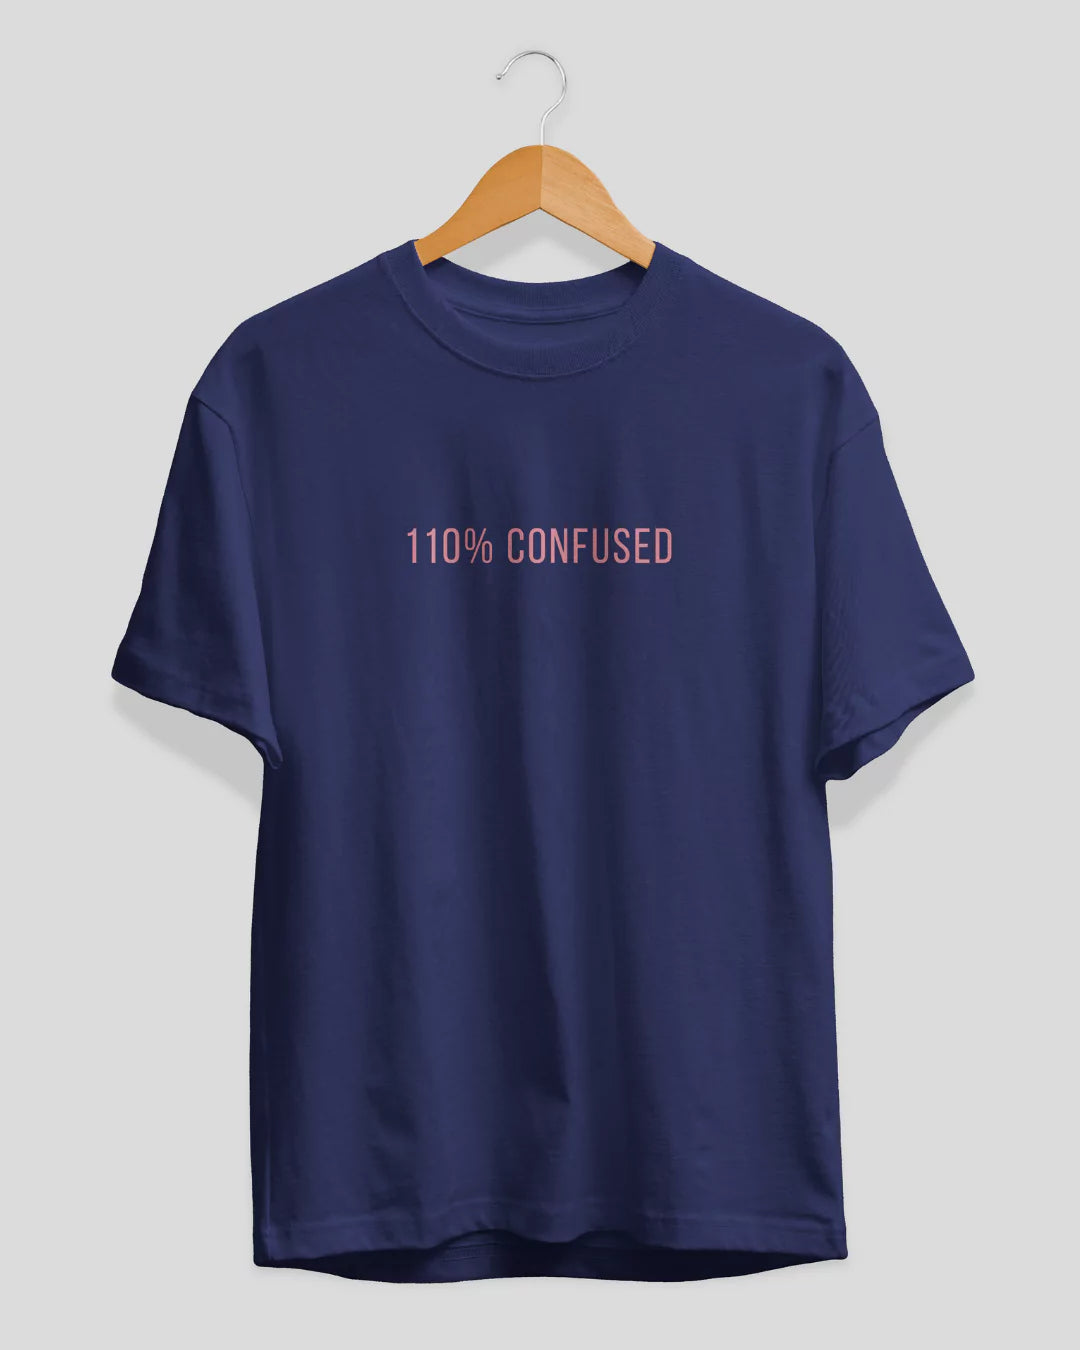 110% Confused T-Shirt